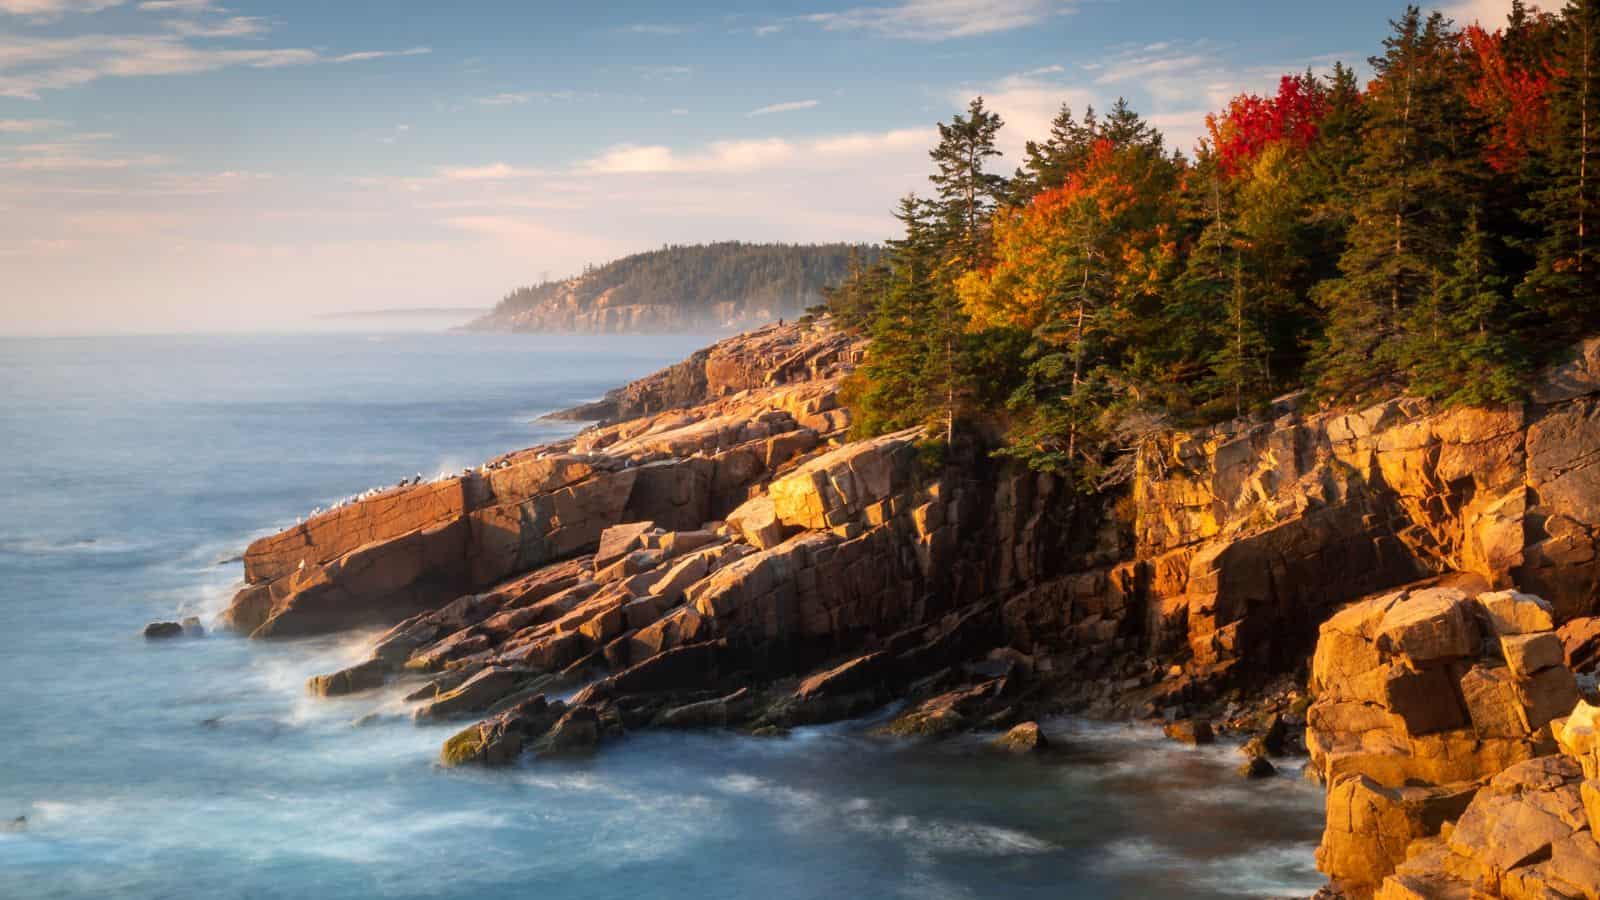 <p>Labeled as the “gateway to Acadia National Park,” Bar Harbor is the ideal weekend trip this summer for outdoor enthusiasts. The heart of the tiny town is only a 28-minute walk from the park’s border.</p><p>There’s no shortage of things to do in and around the town and national park: hike up the mountains, paddle a canoe, or test your balance on a stand-up paddle board. After, dine at a hotel overlooking the water. At night, you can pitch a tent and camp under the stars or relax with creature comforts at an inn or hotel in the town.</p>